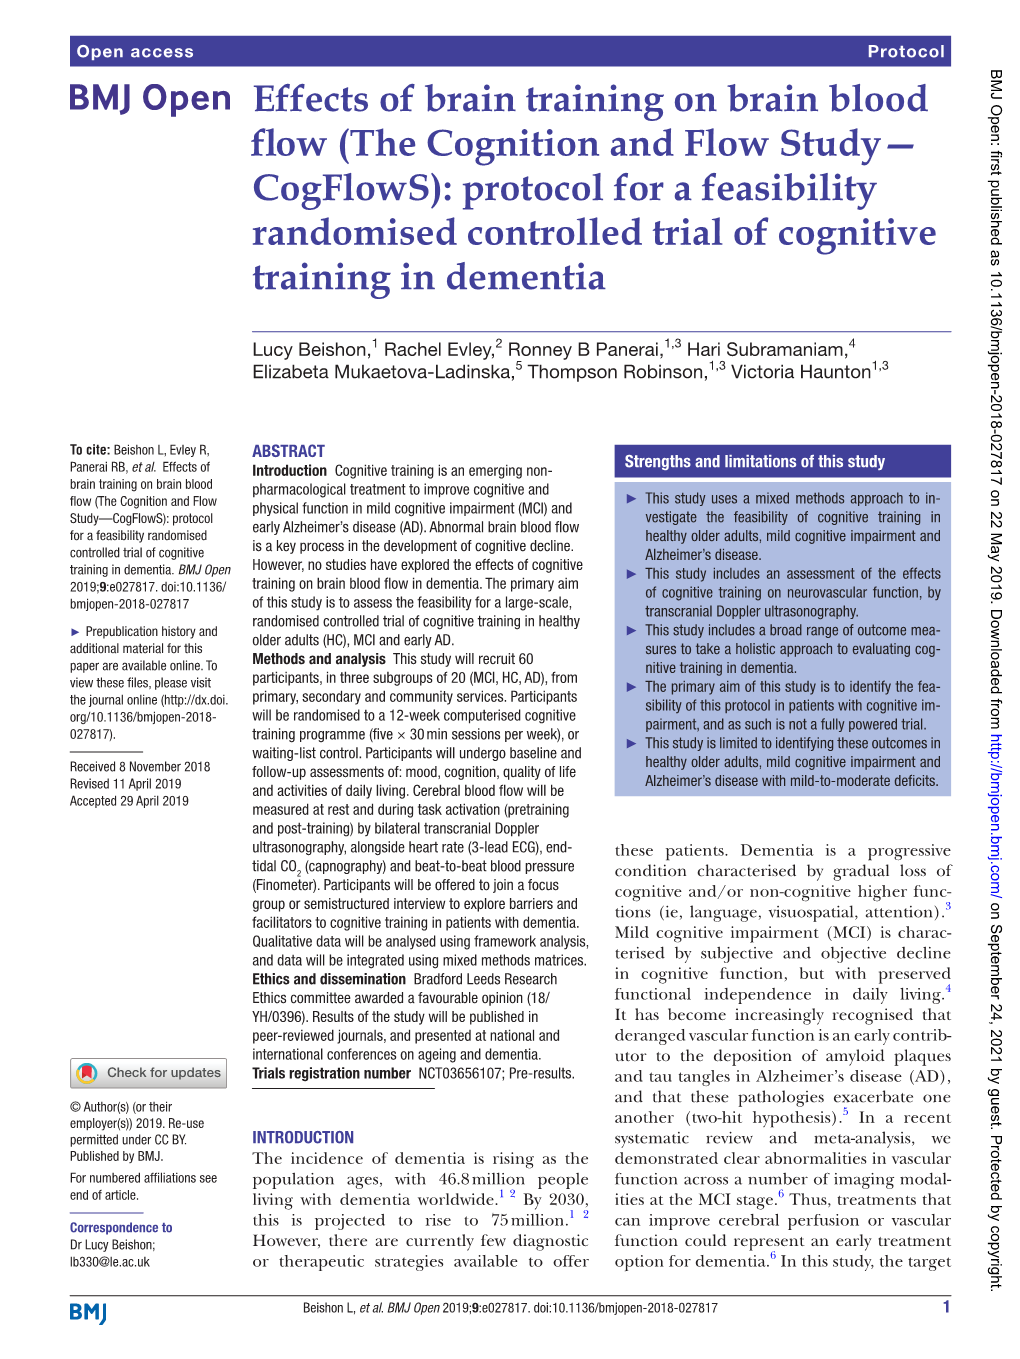 The Cognition and Flow Study— Cogflows): Protocol for a Feasibility Randomised Controlled Trial of Cognitive Training in Dementia